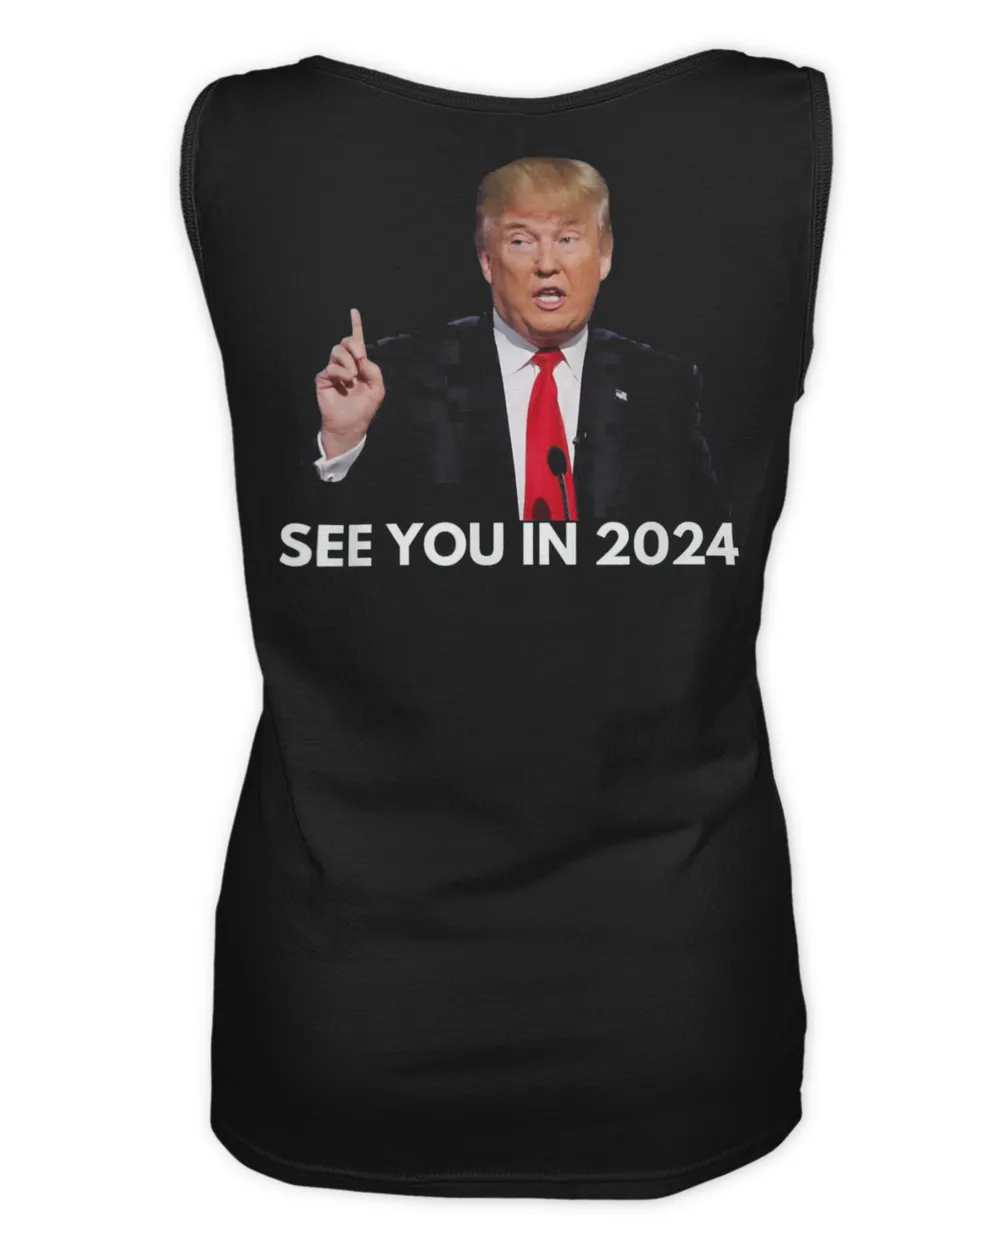 See You in 2024 trump T-Shirt